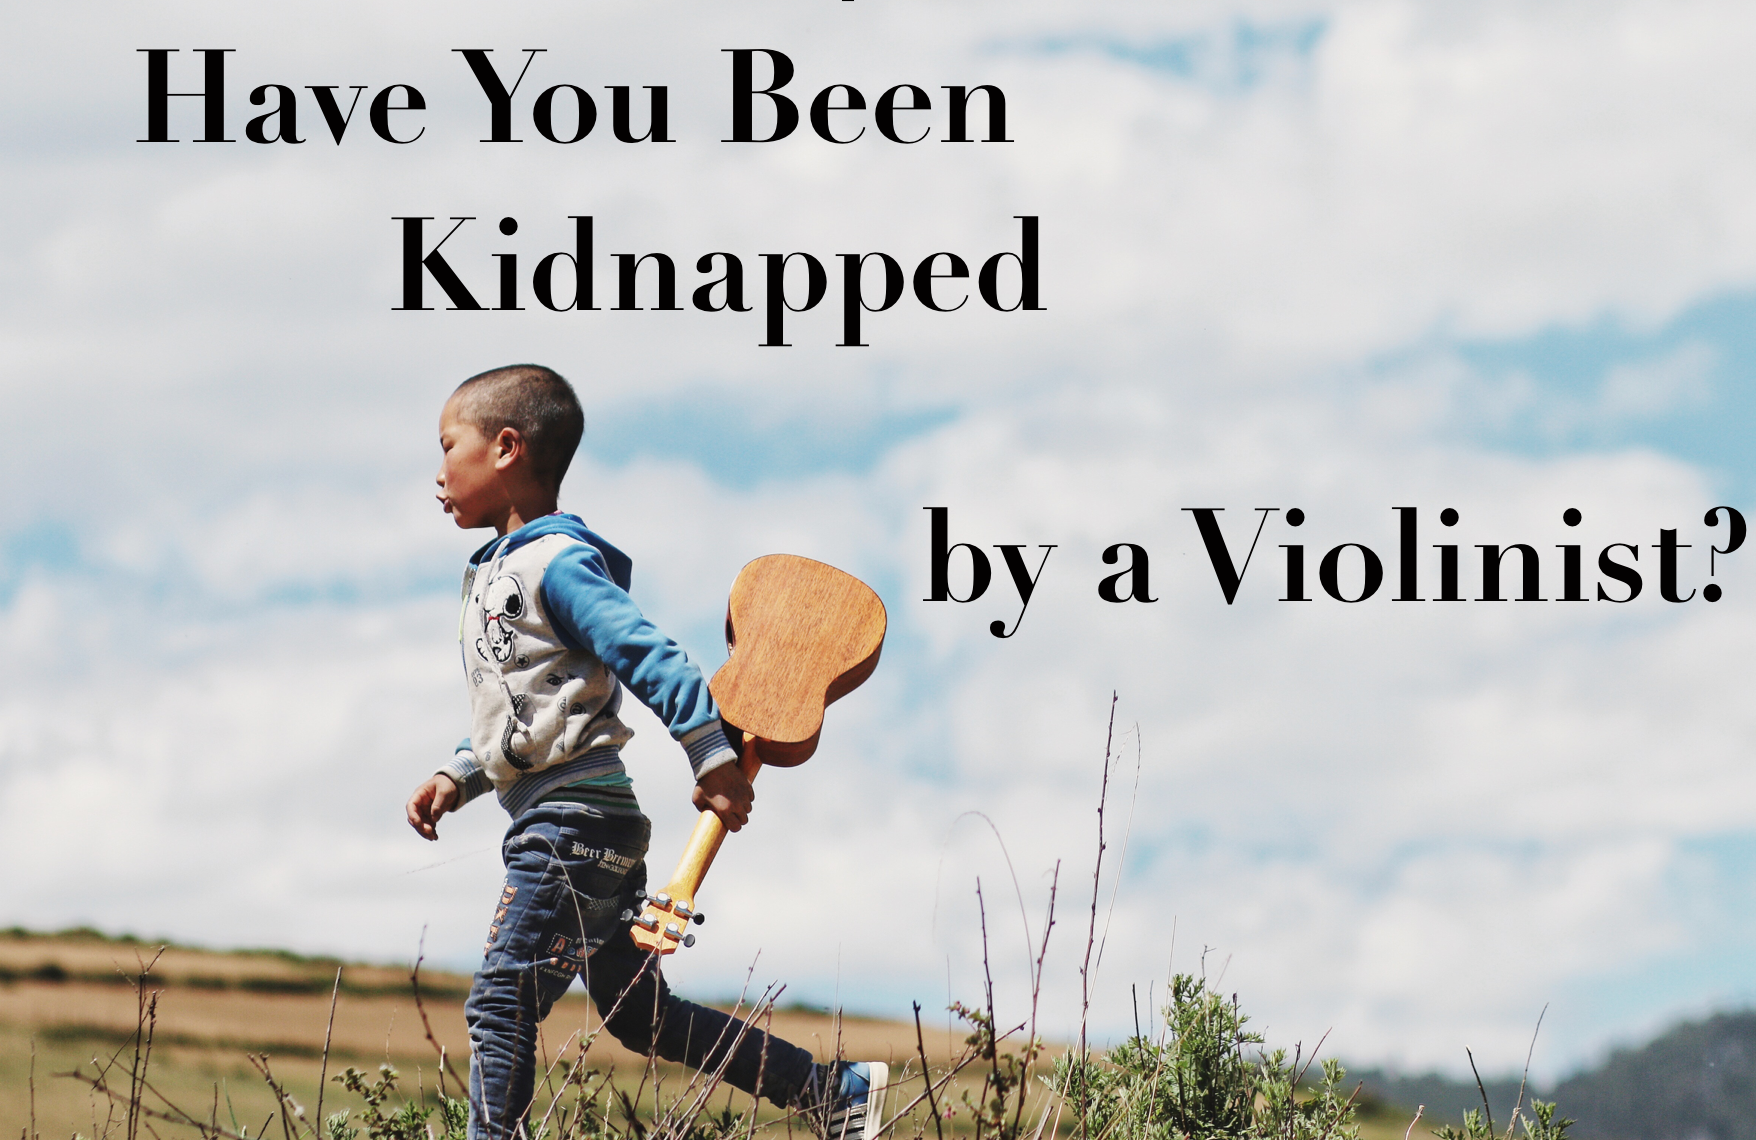 Featured image for “Have You Been Kidnapped by a Violinist?”